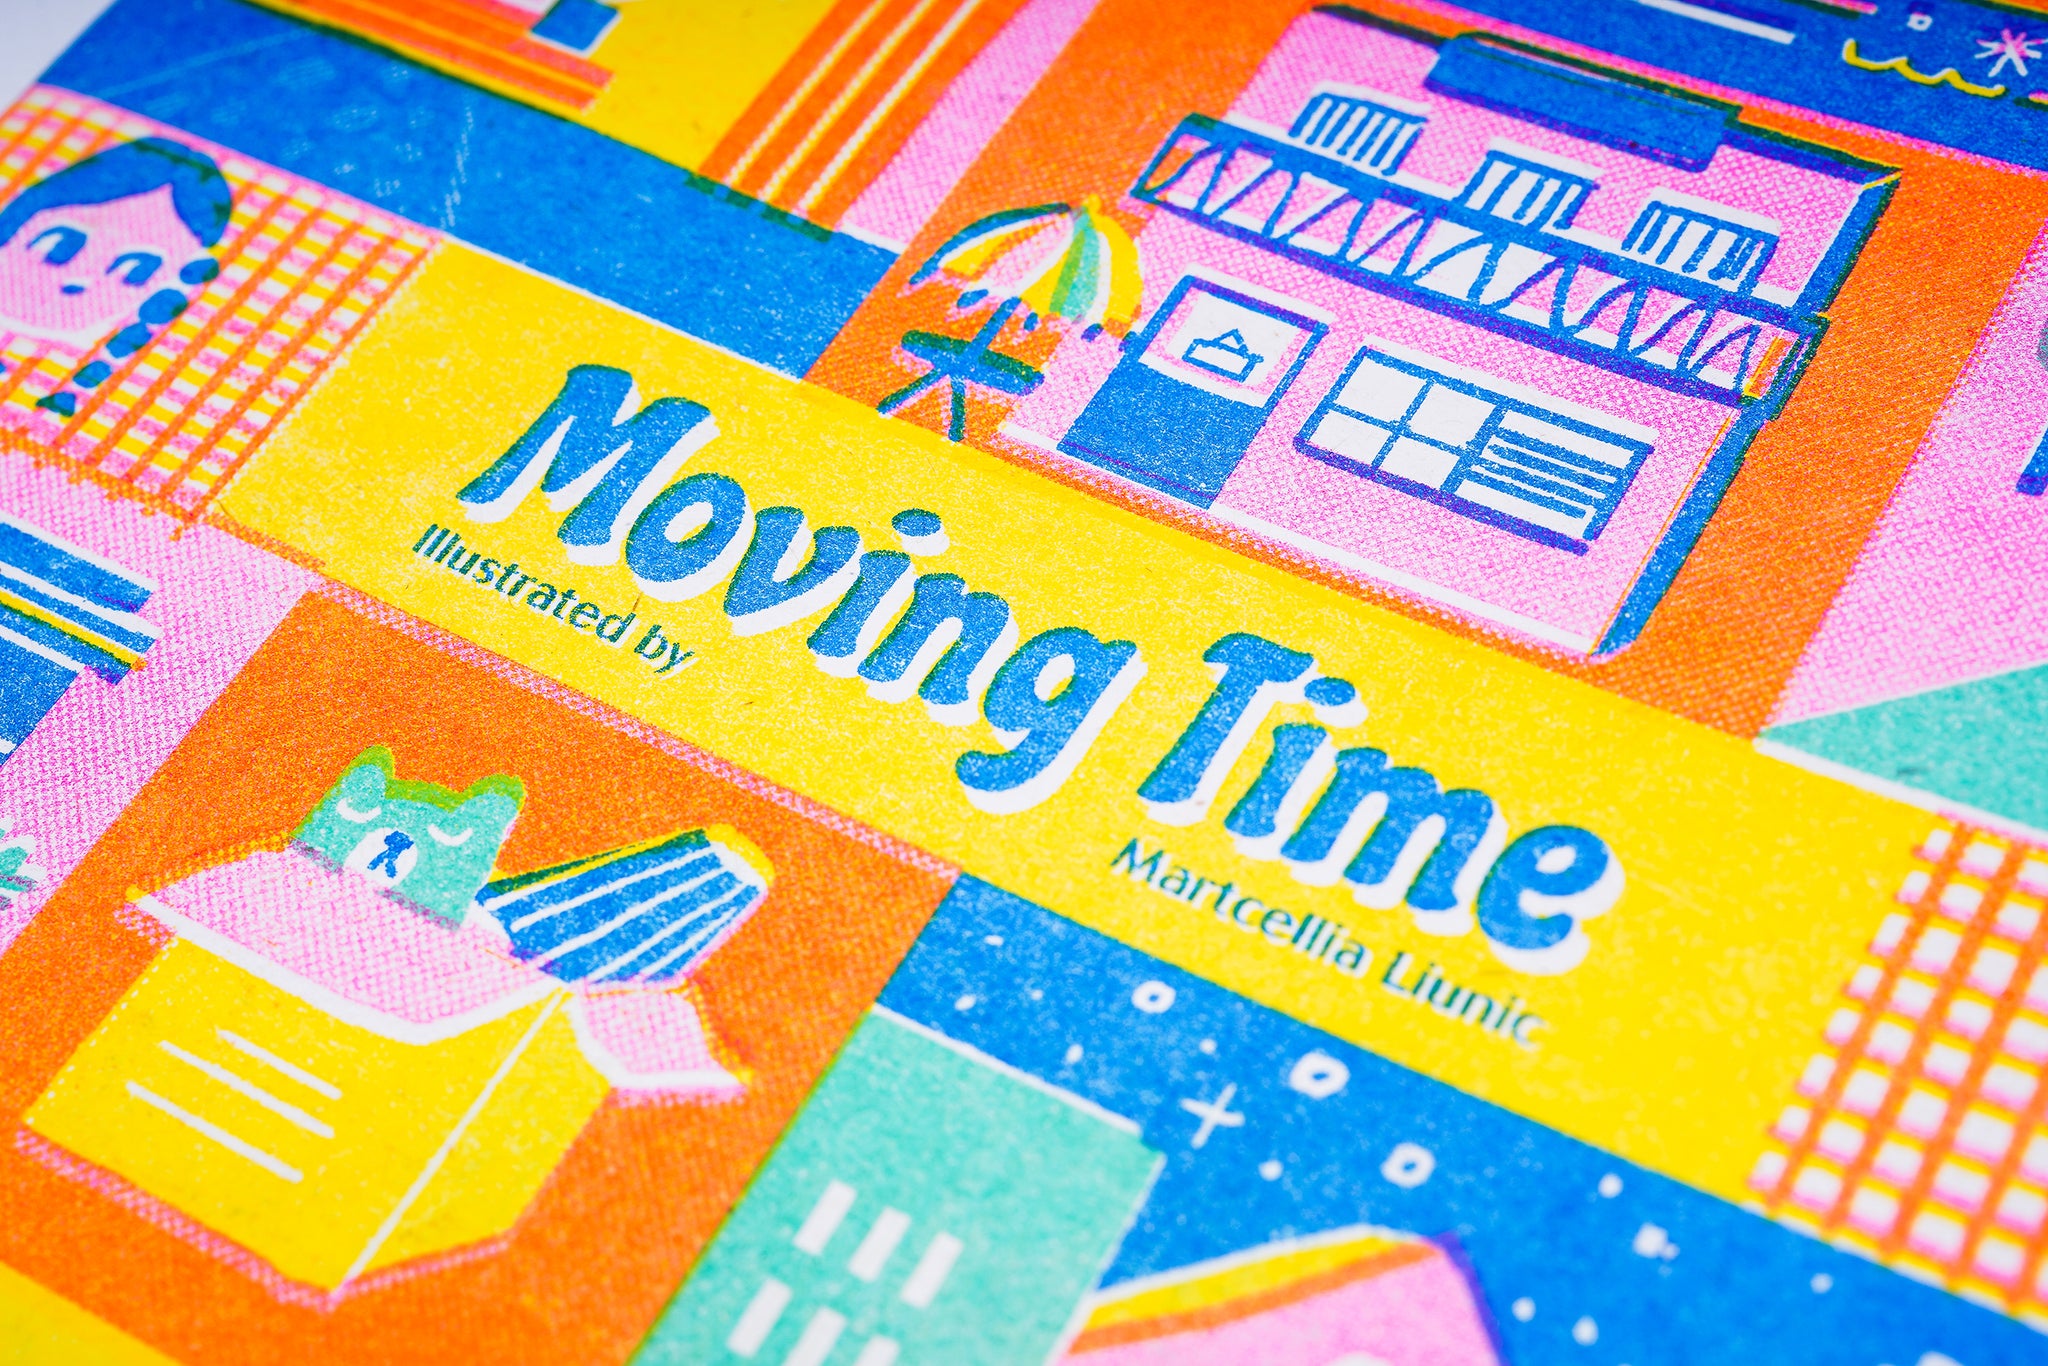 Moving Time By Martcellia Liunic